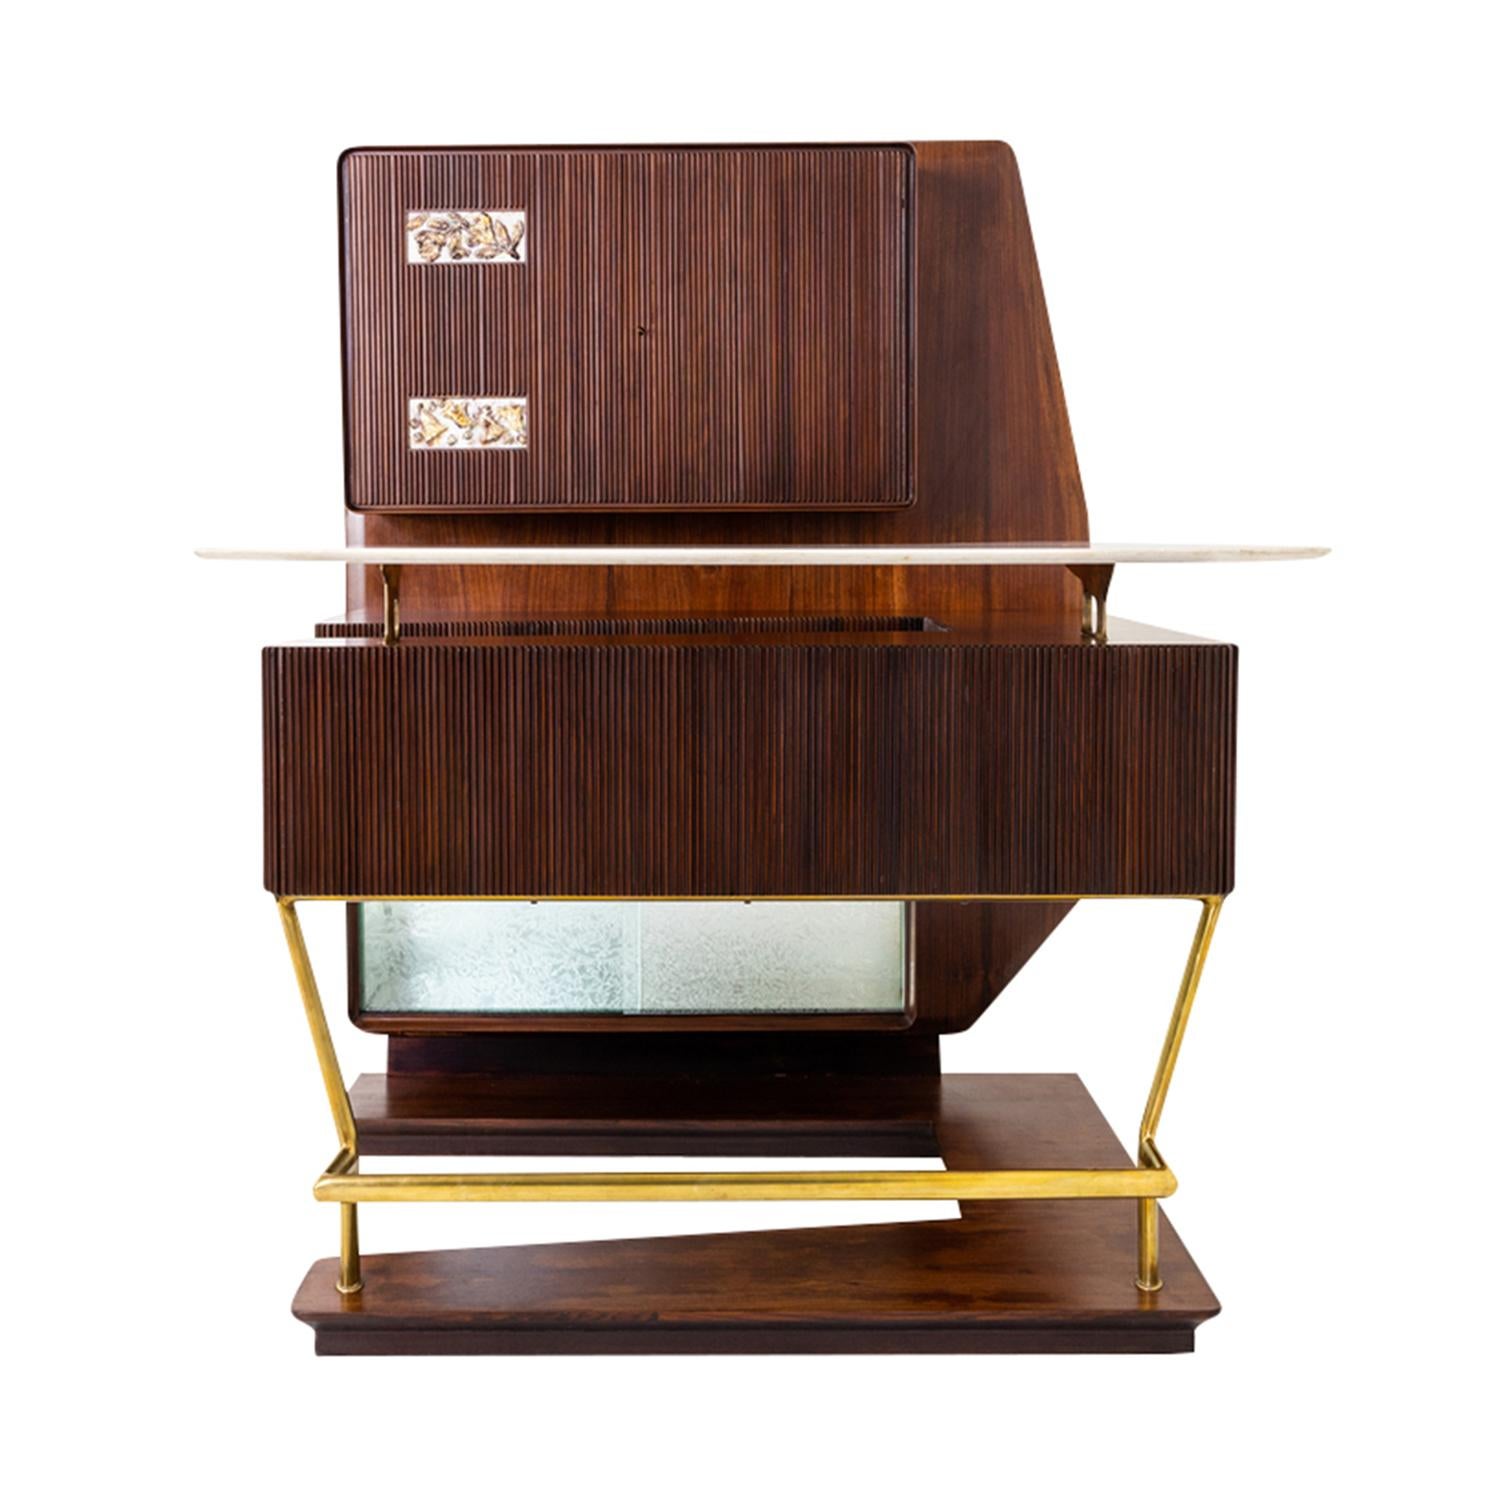 A large vintage Mid-Century modern Italian cocktail bar with a counter made of hand crafted polished Mahogany and Rosewood, designed most likely by Osvaldo Borsani, in good condition. The top part of the L-form bar features a cabinet with two